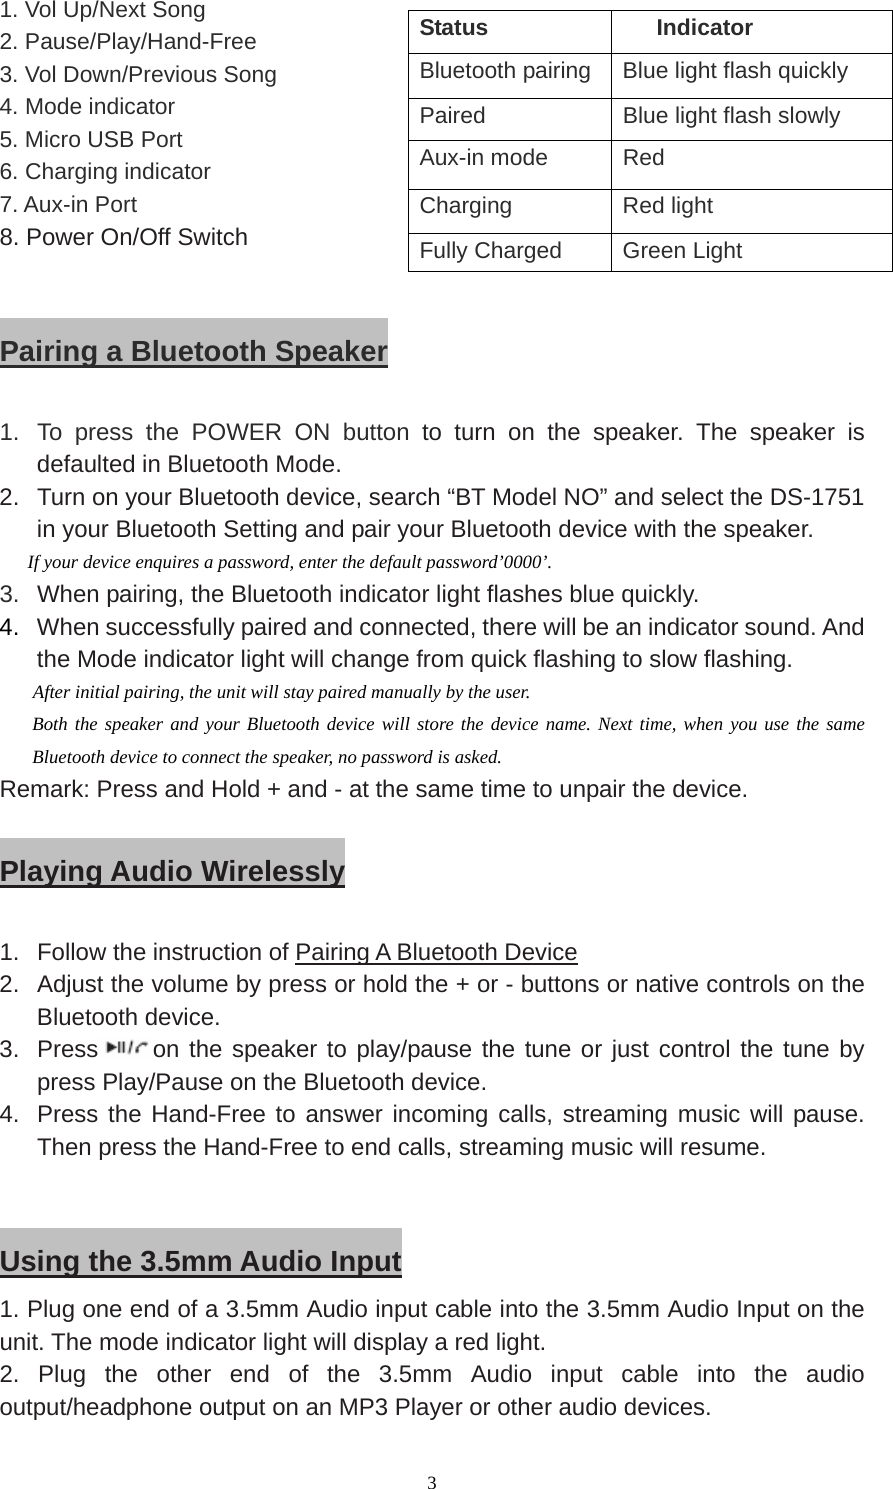  3 1. Vol Up/Next Song 2. Pause/Play/Hand-Free 3. Vol Down/Previous Song 4. Mode indicator 5. Micro USB Port 6. Charging indicator 7. Aux-in Port                        8. Power On/Off Switch                                     Pairing a Bluetooth Speaker  1.  To press the POWER ON button to turn on the speaker. The speaker is defaulted in Bluetooth Mode. 2.  Turn on your Bluetooth device, search “BT Model NO” and select the DS-1751 in your Bluetooth Setting and pair your Bluetooth device with the speaker.   If your device enquires a password, enter the default password’0000’. 3.  When pairing, the Bluetooth indicator light flashes blue quickly. 4.  When successfully paired and connected, there will be an indicator sound. And   the Mode indicator light will change from quick flashing to slow flashing.    After initial pairing, the unit will stay paired manually by the user. Both the speaker and your Bluetooth device will store the device name. Next time, when you use the same Bluetooth device to connect the speaker, no password is asked. Remark: Press and Hold + and - at the same time to unpair the device.  Playing Audio Wirelessly  1.  Follow the instruction of Pairing A Bluetooth Device 2.  Adjust the volume by press or hold the + or - buttons or native controls on the Bluetooth device. 3. Press on the speaker to play/pause the tune or just control the tune by press Play/Pause on the Bluetooth device. 4.  Press the Hand-Free to answer incoming calls, streaming music will pause. Then press the Hand-Free to end calls, streaming music will resume.     Using the 3.5mm Audio Input 1. Plug one end of a 3.5mm Audio input cable into the 3.5mm Audio Input on the unit. The mode indicator light will display a red light. 2. Plug the other end of the 3.5mm Audio input cable into the audio output/headphone output on an MP3 Player or other audio devices. Status Indicator Bluetooth pairing  Blue light flash quickly Paired    Blue light flash slowly Aux-in mode  Red Charging   Red light Fully Charged  Green Light 